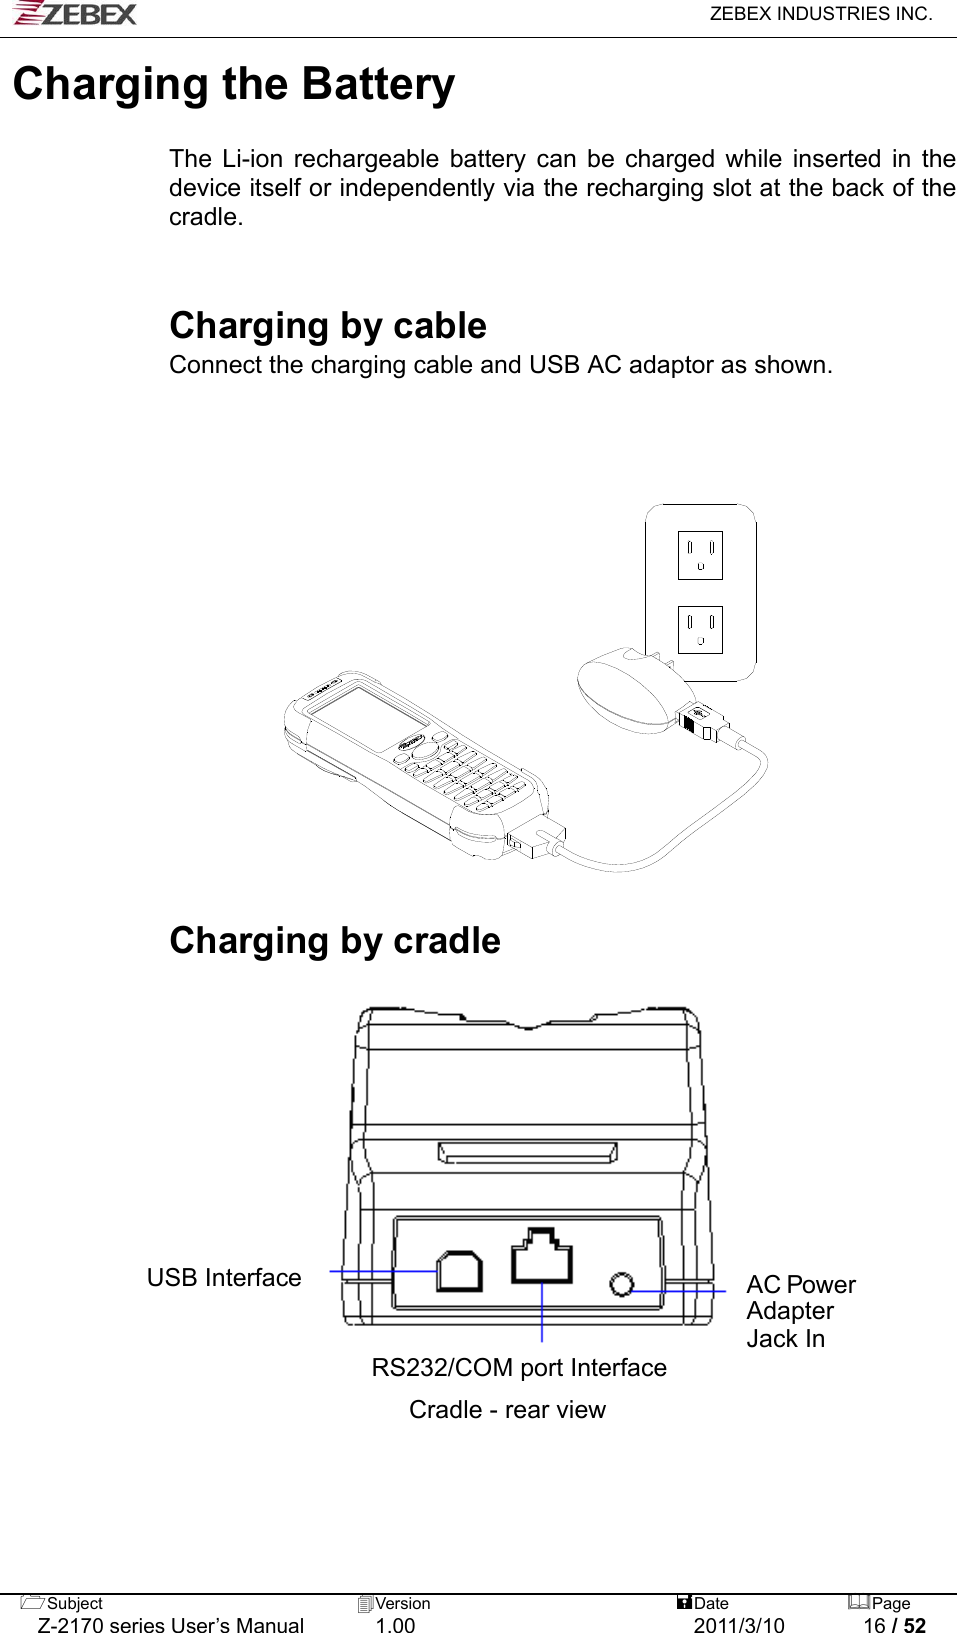   ZEBEX INDUSTRIES INC.  Subject  Version   DatePage   Z-2170 series User’s Manual  1.00  2011/3/10  16 / 52 Charging the Battery    The Li-ion rechargeable battery can be charged while inserted in the device itself or independently via the recharging slot at the back of the cradle.   Charging by cable Connect the charging cable and USB AC adaptor as shown.           Charging by cradle                      AC Power Adapter Jack In USB Interface  RS232/COM port Interface Cradle - rear view 